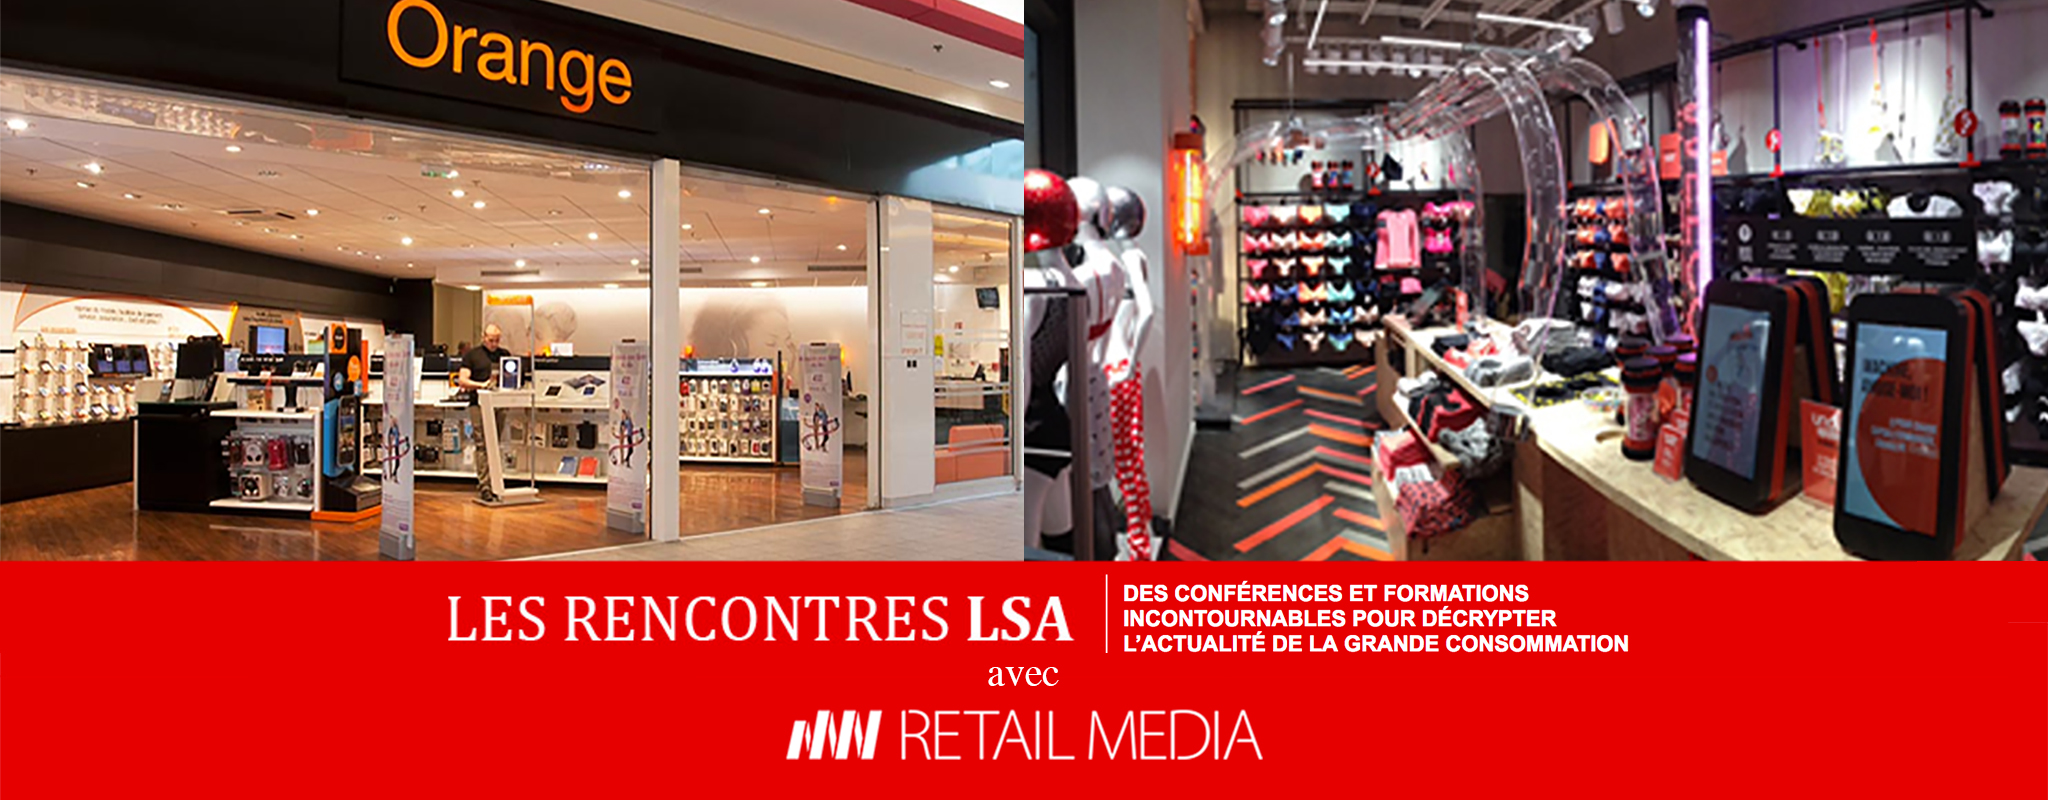 Parcours Clients innovation digitales mobile in store point vente connecté